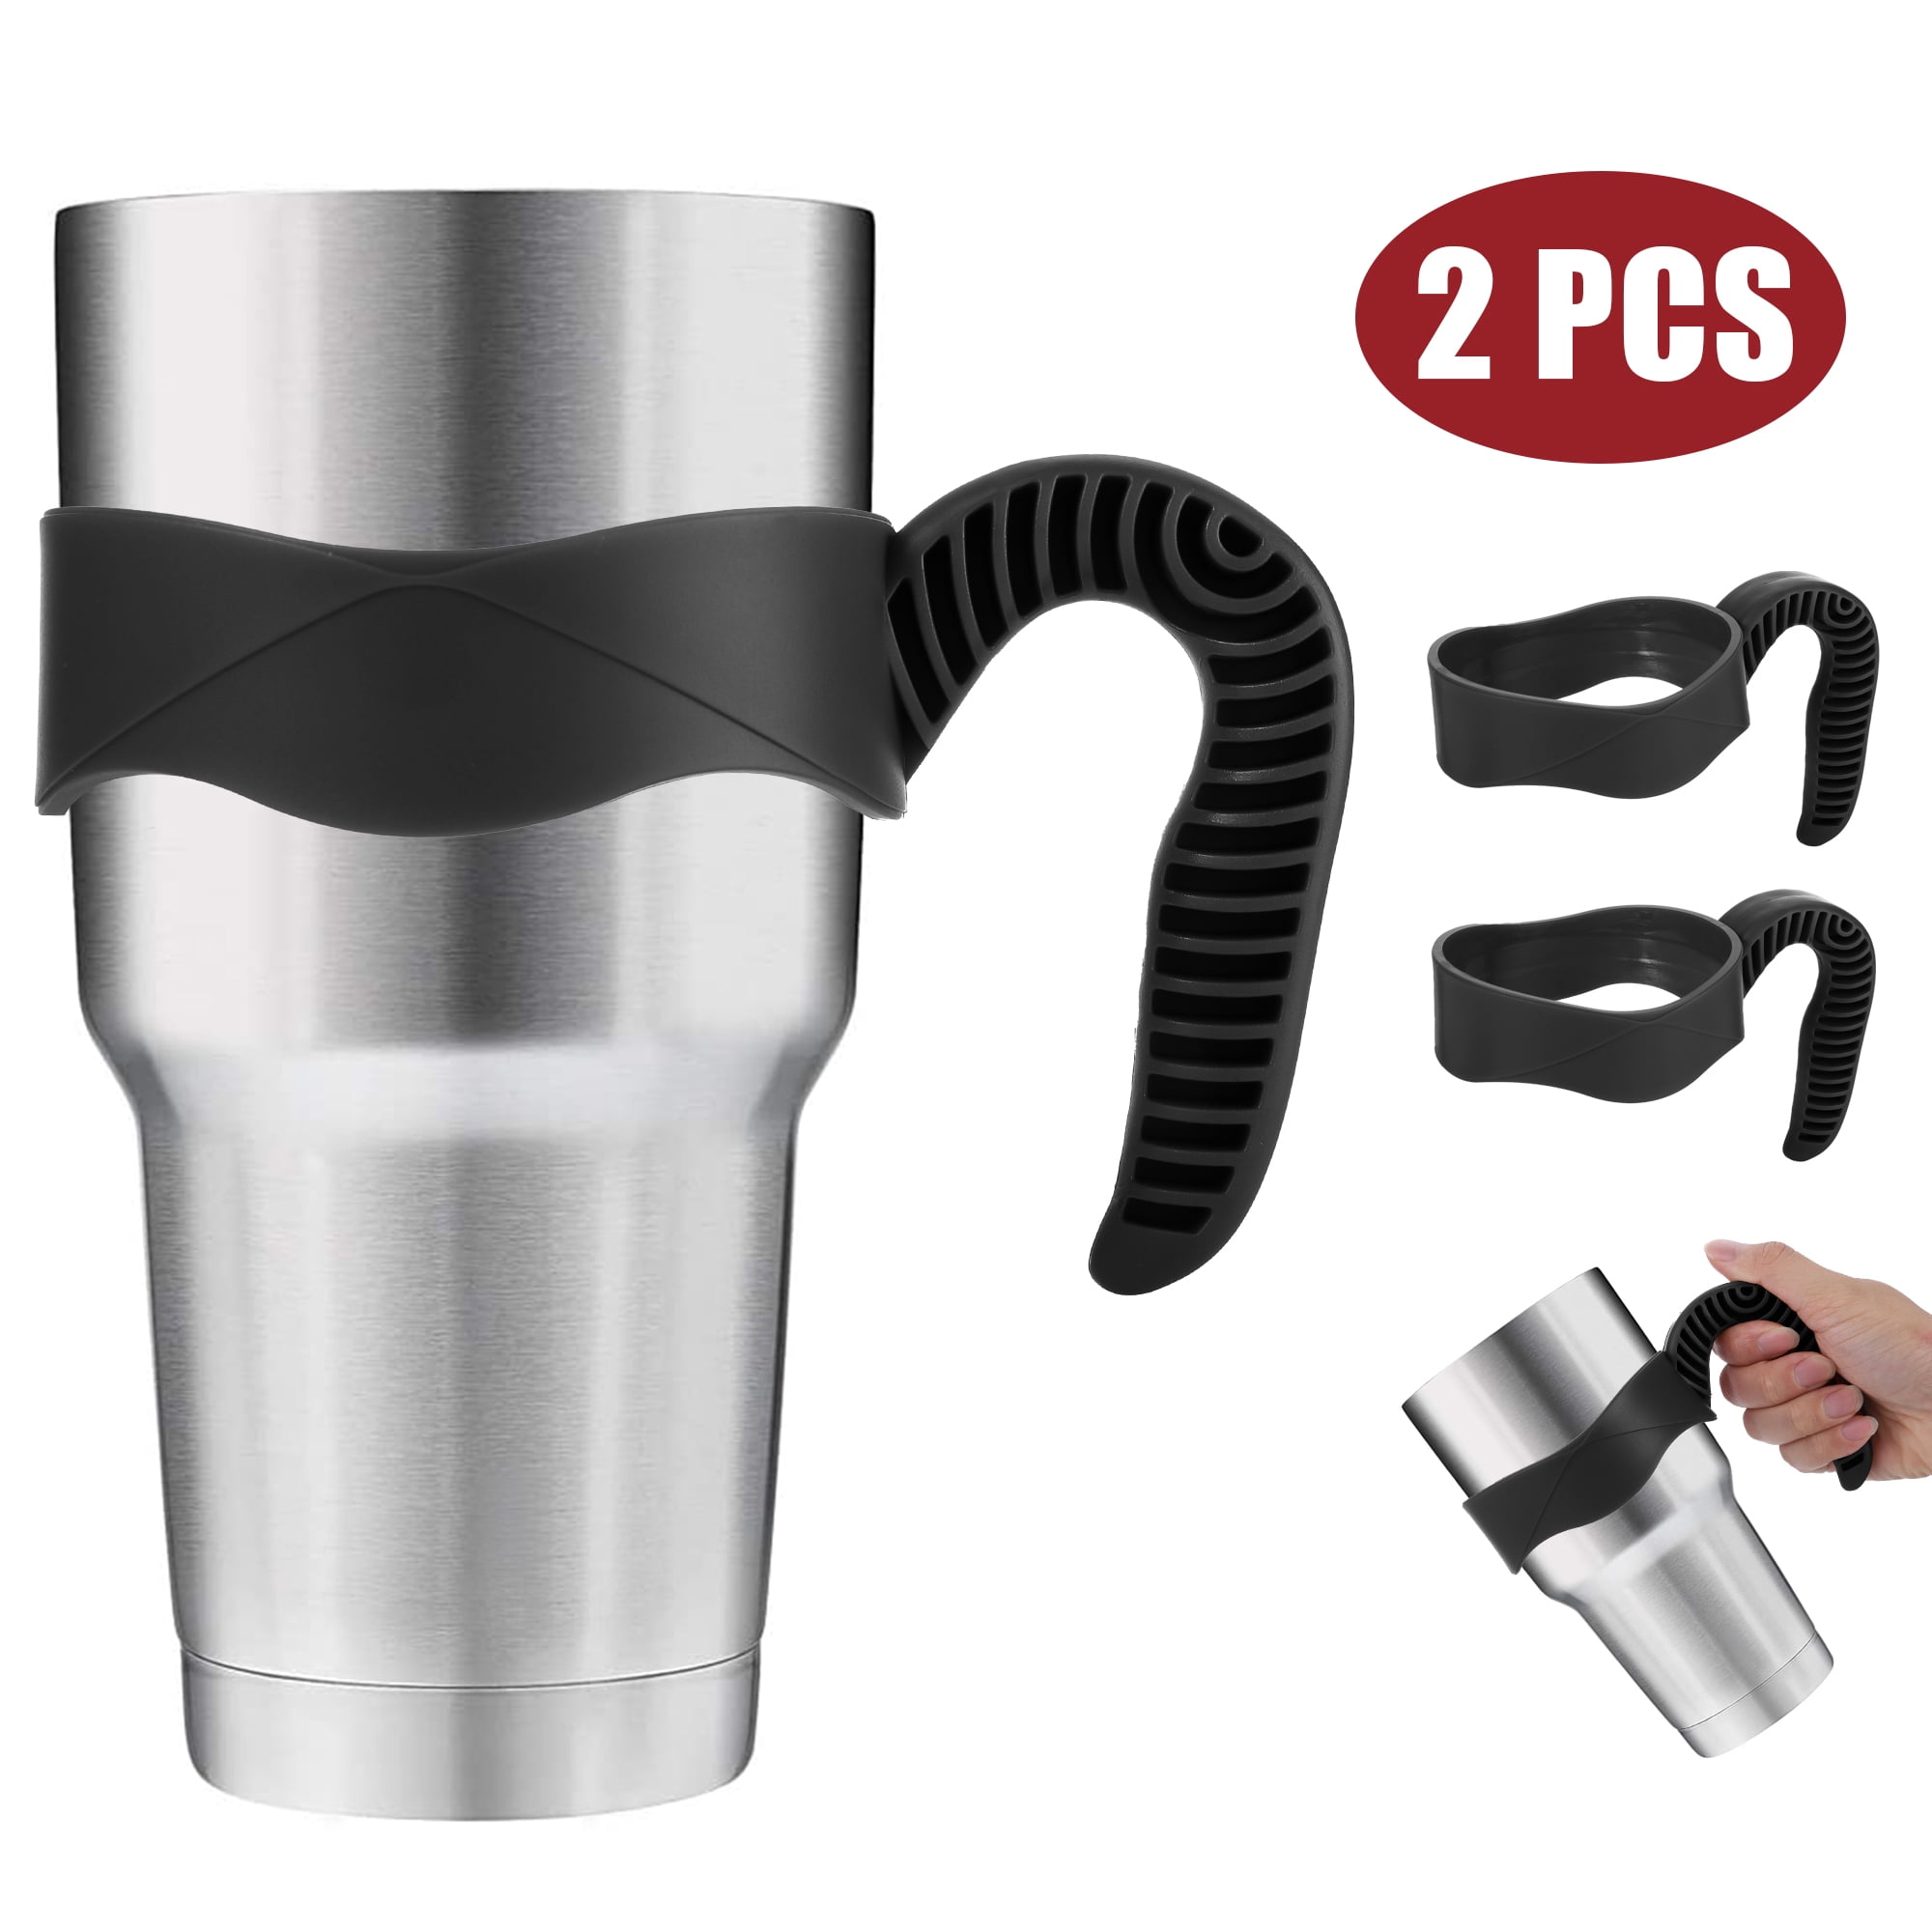 Handle for Tumblers 30oz, for Stainless Steel Insulated Coffee Travel Mug, Non-Slip Handle Travel Cup Holder for Use with Yeti, Ozark Trail etc(Black)